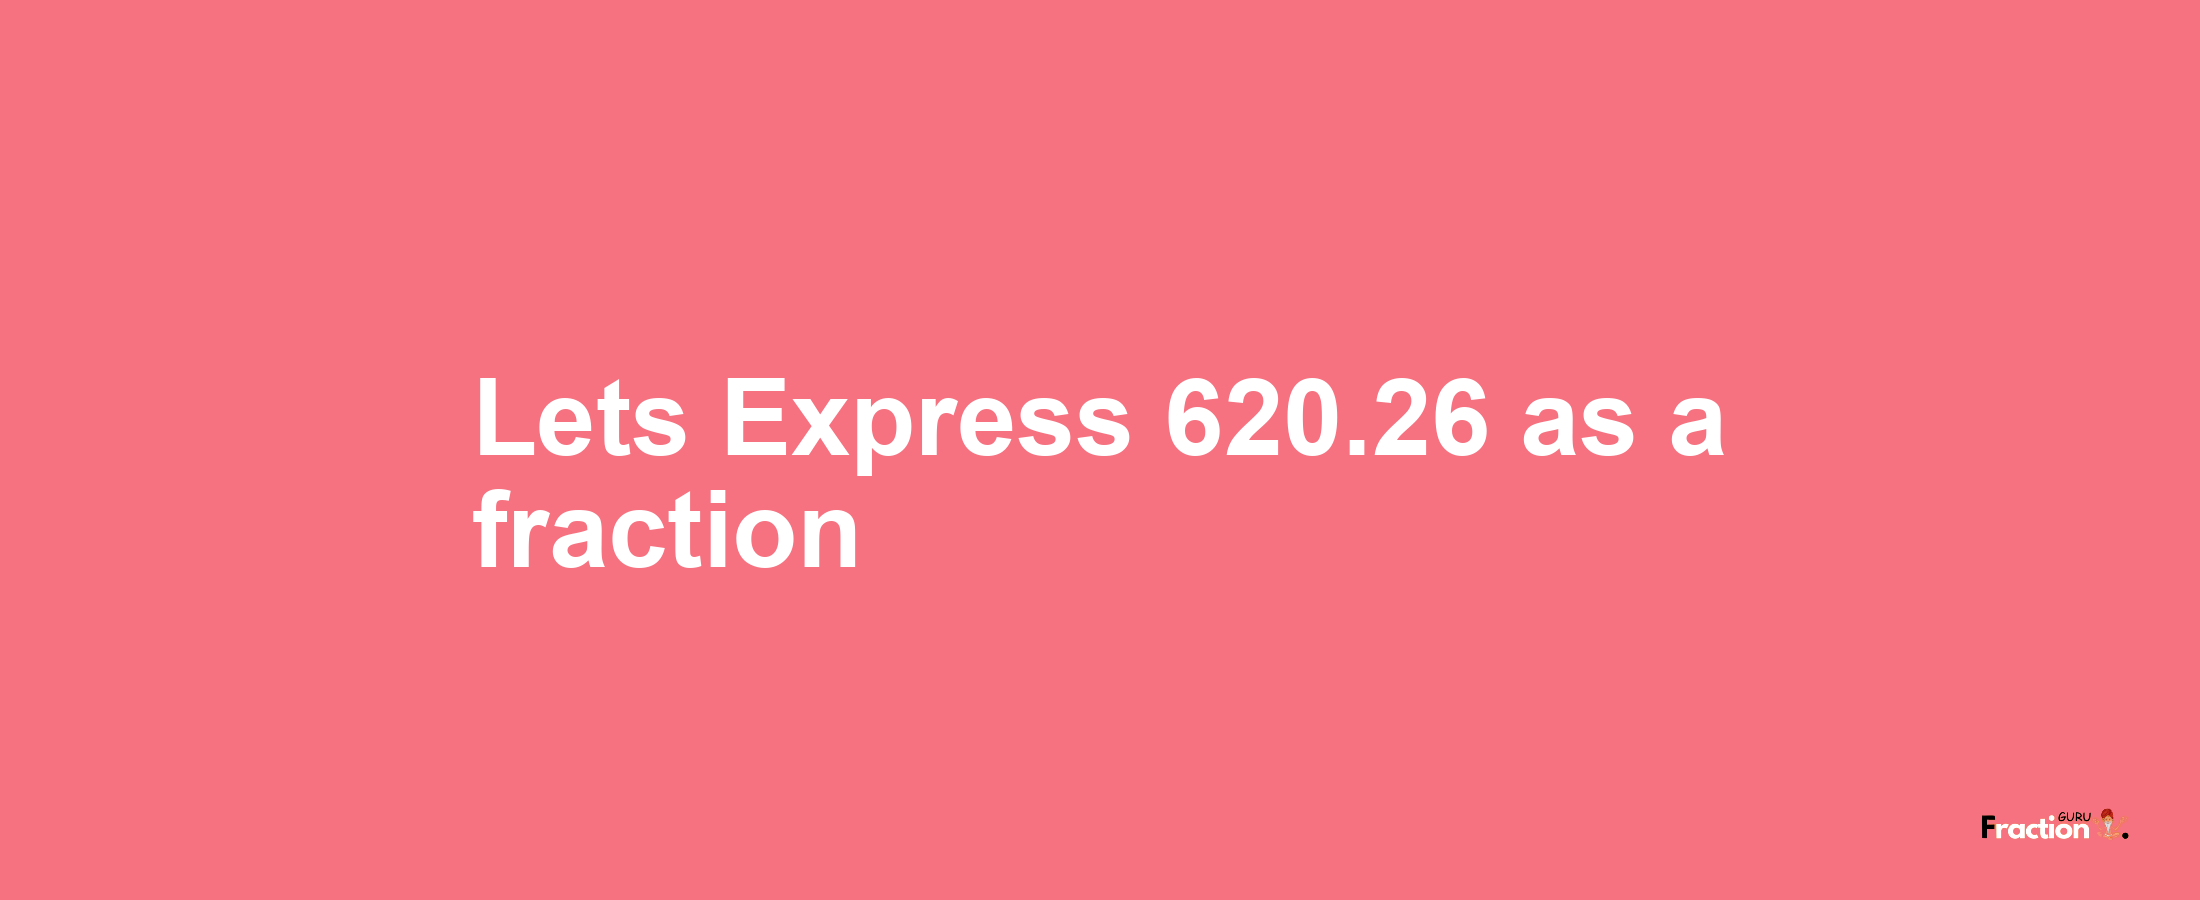 Lets Express 620.26 as afraction